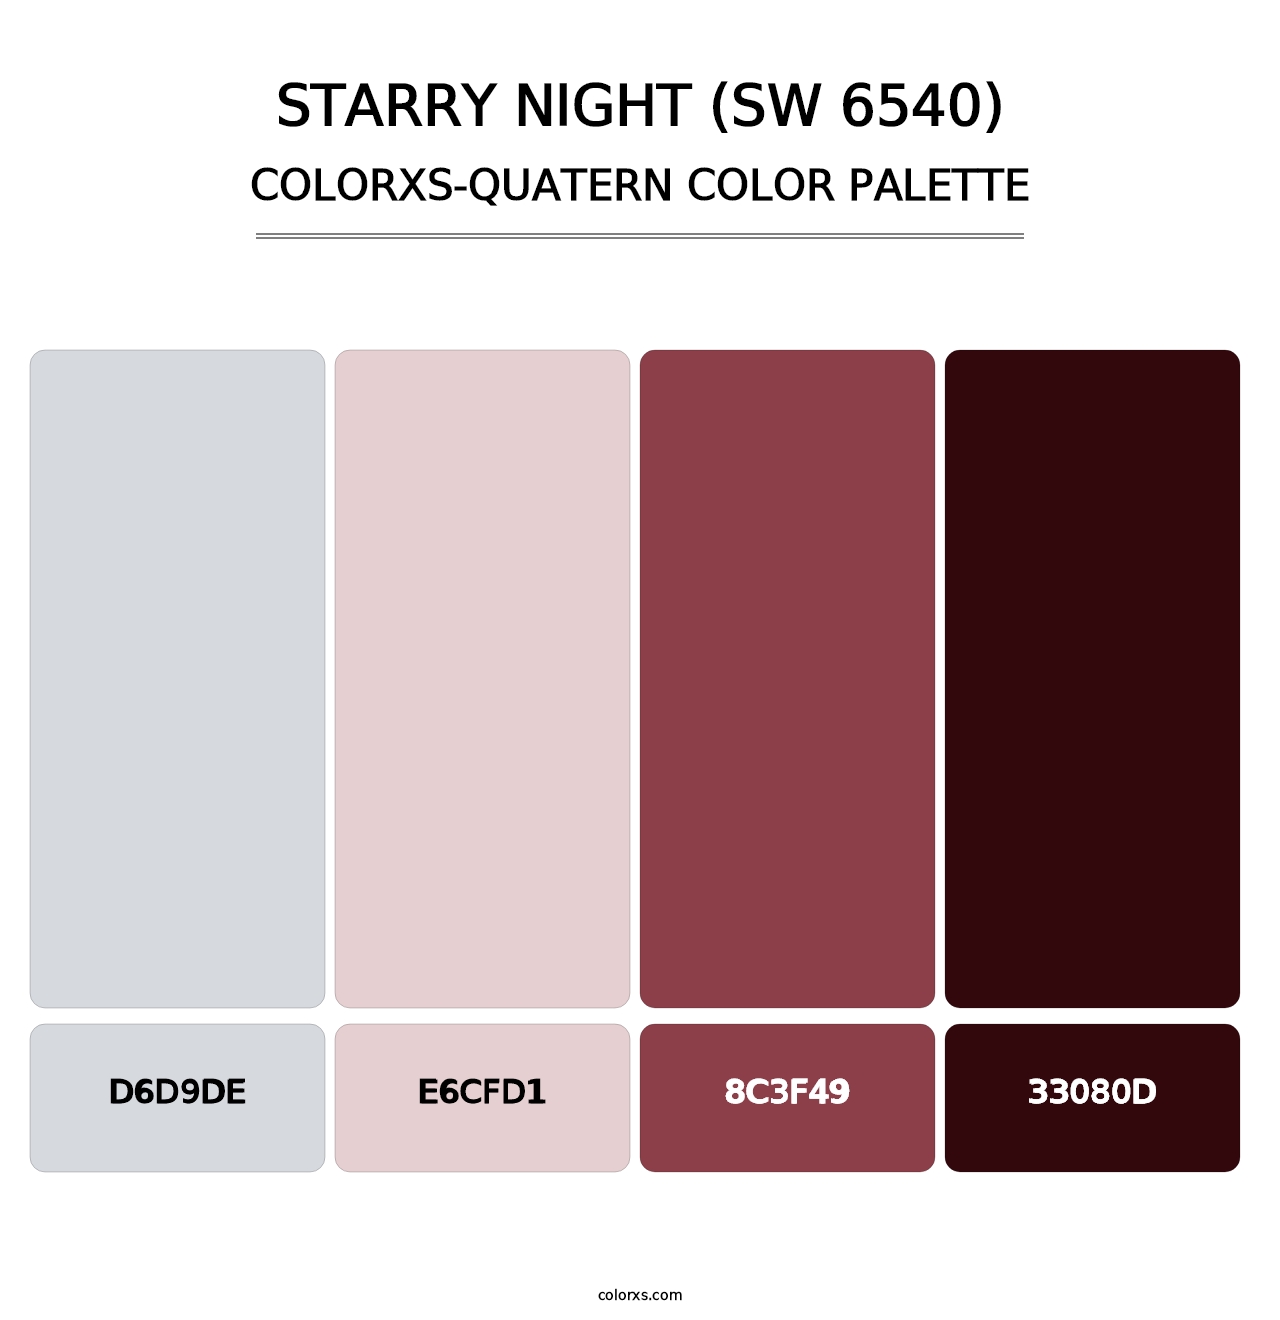 Starry Night (SW 6540) - Colorxs Quatern Palette